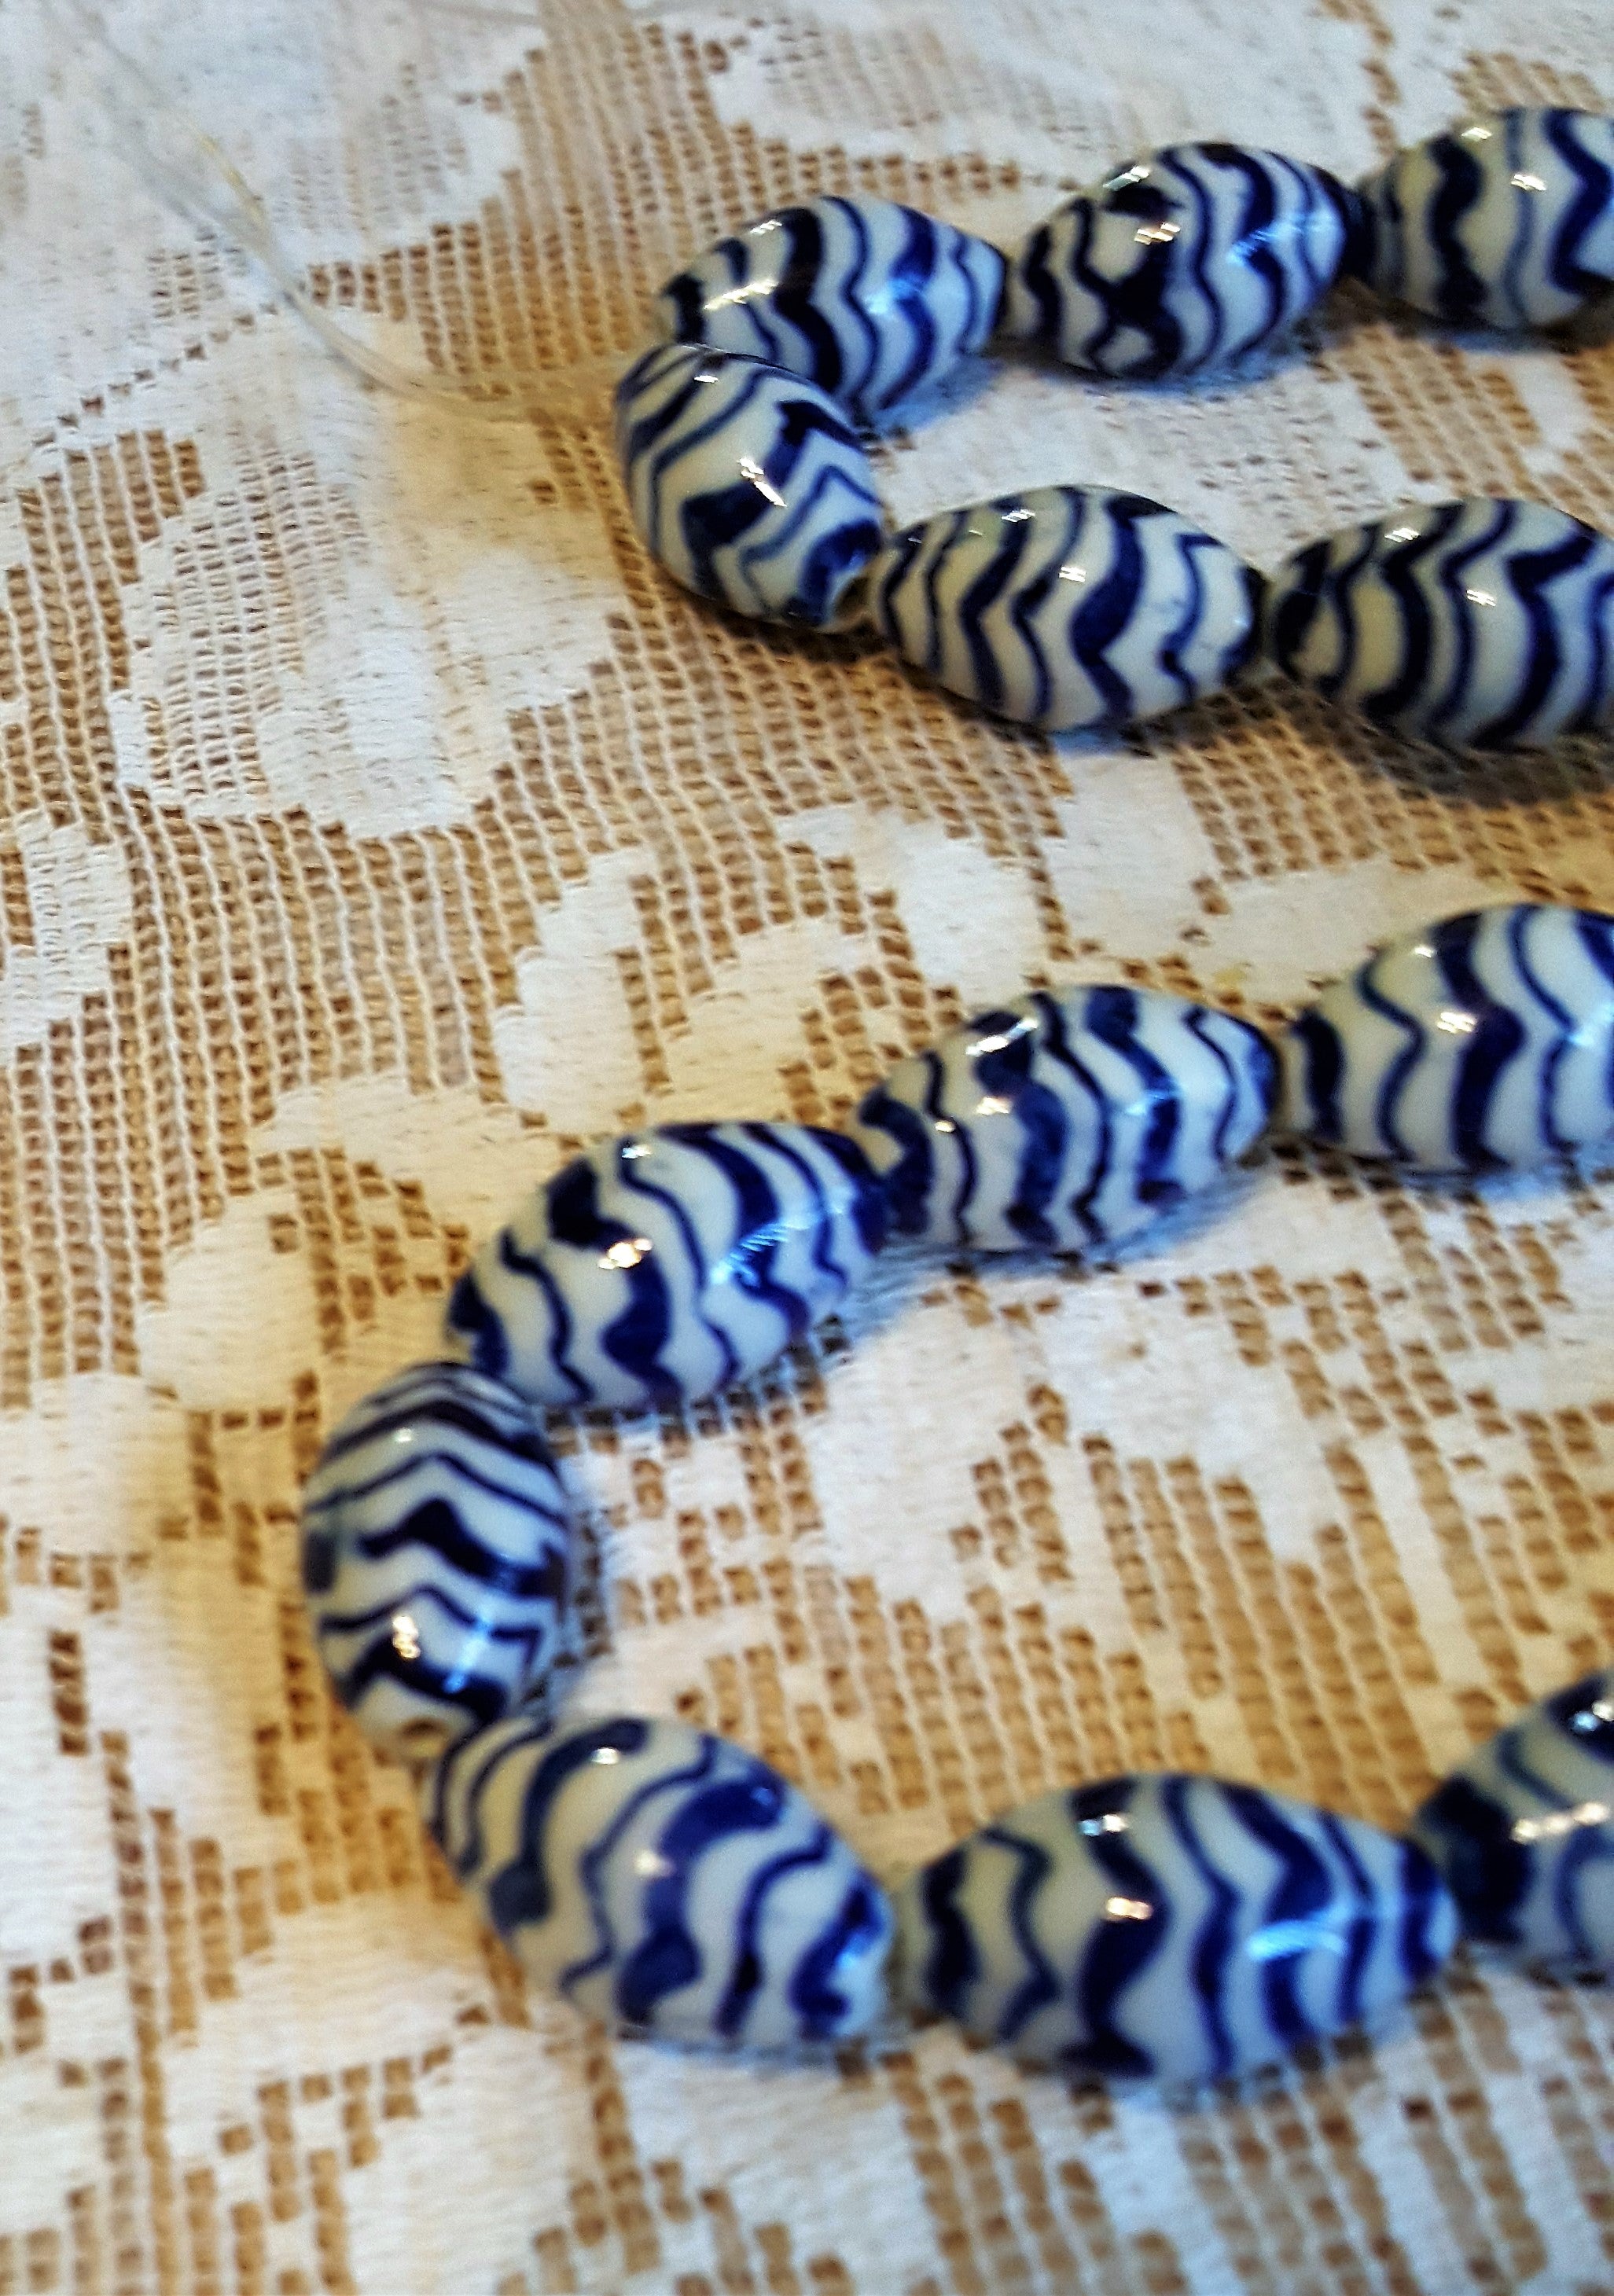 Modern style Blue and White Porcelain beads Oval shape Waves of Blue